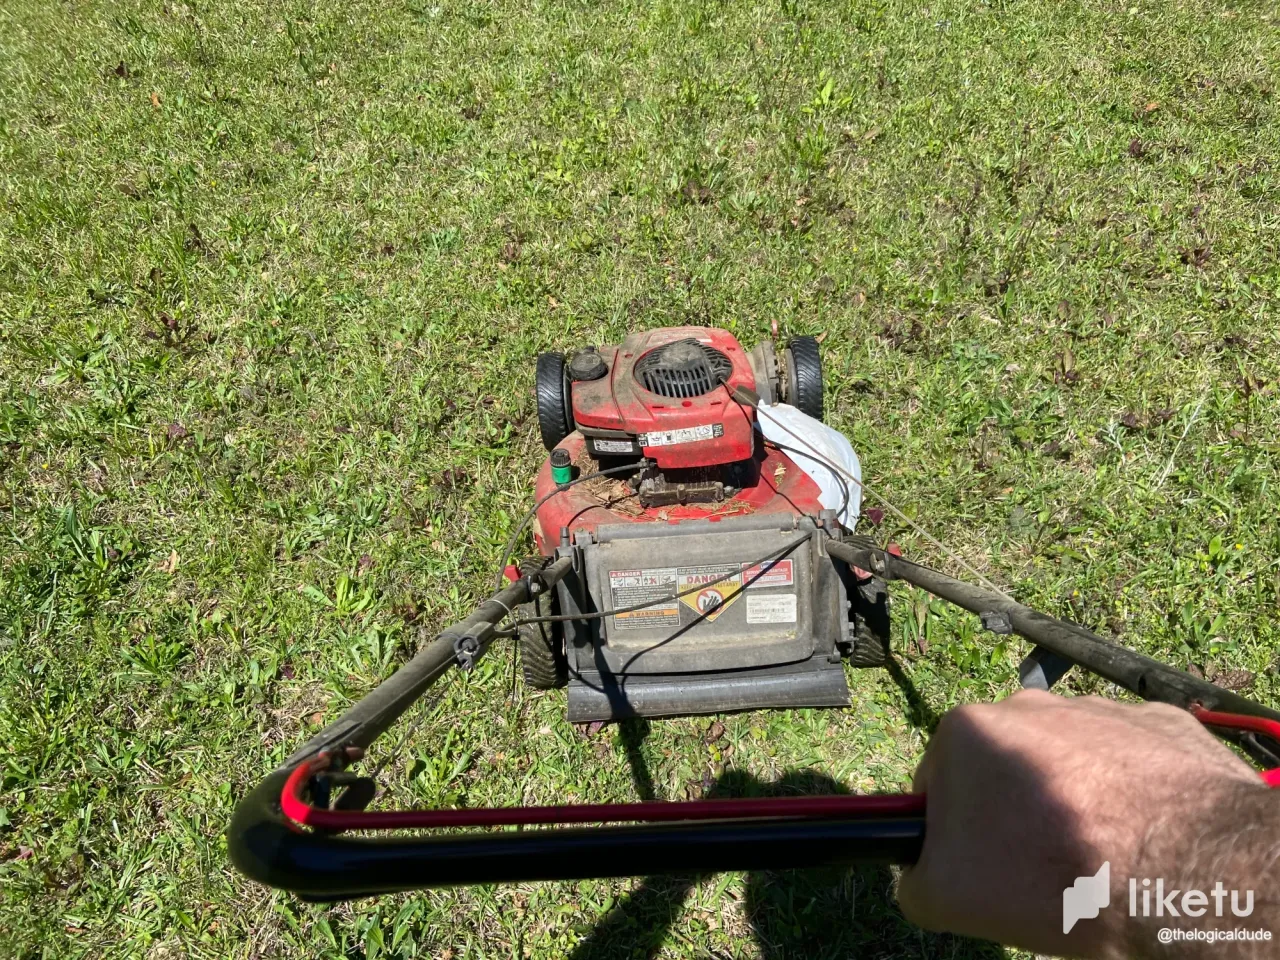 Mowin' Monday on the Homestead- Real Proof of Work!